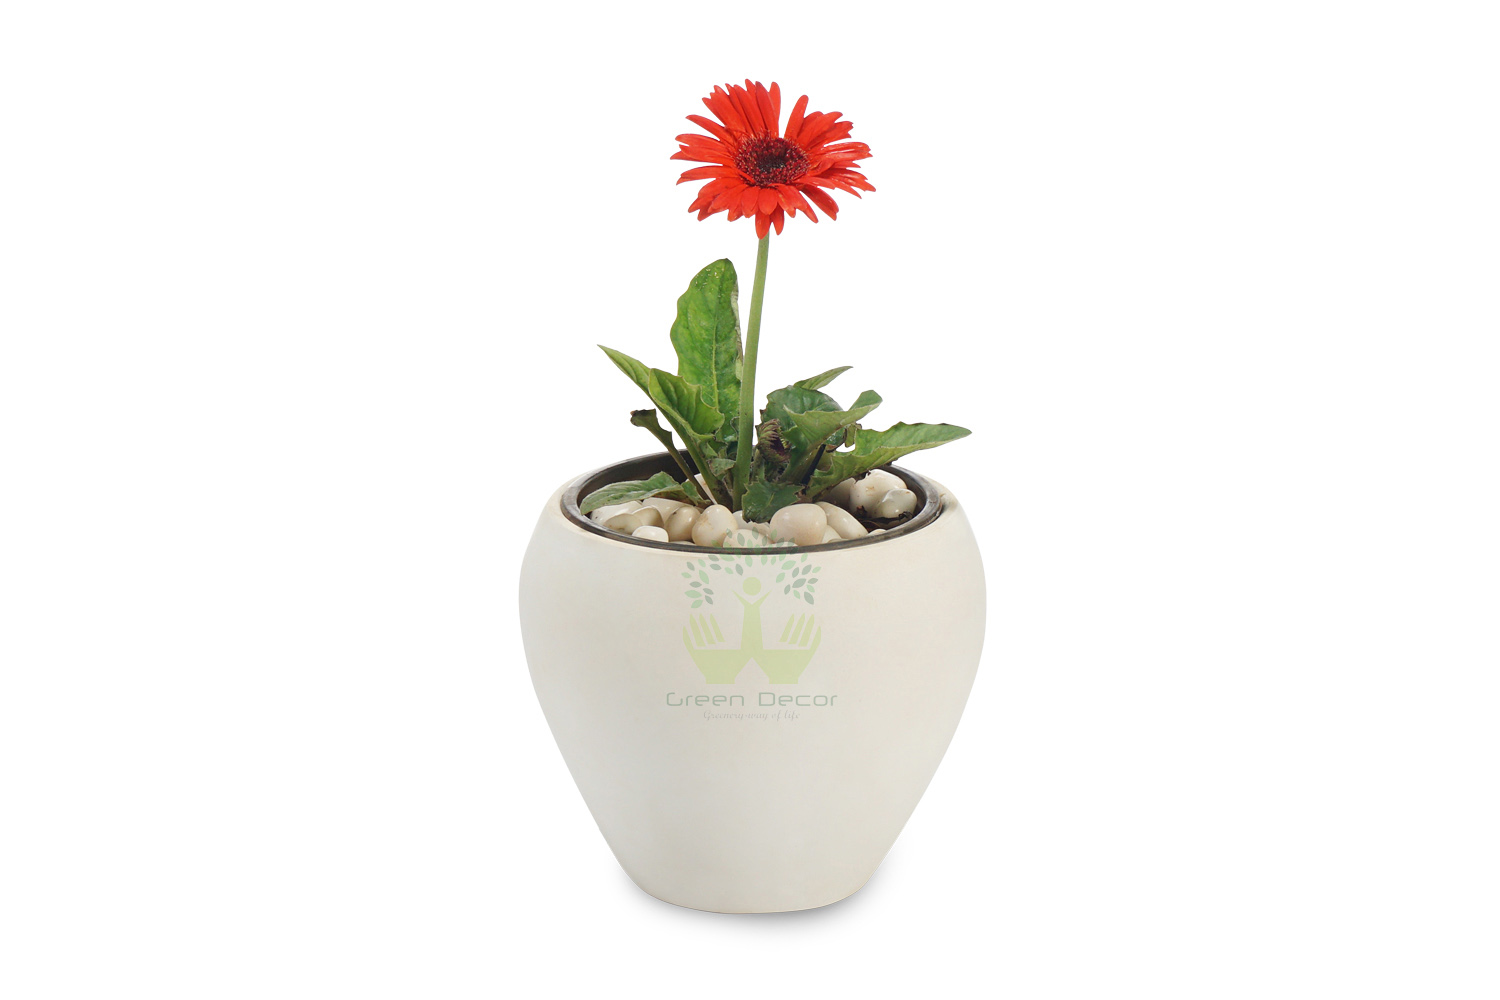 Buy Gerbera Daisy Plants , White Pots and seeds in Delhi NCR by the best online nursery shop Greendecor.